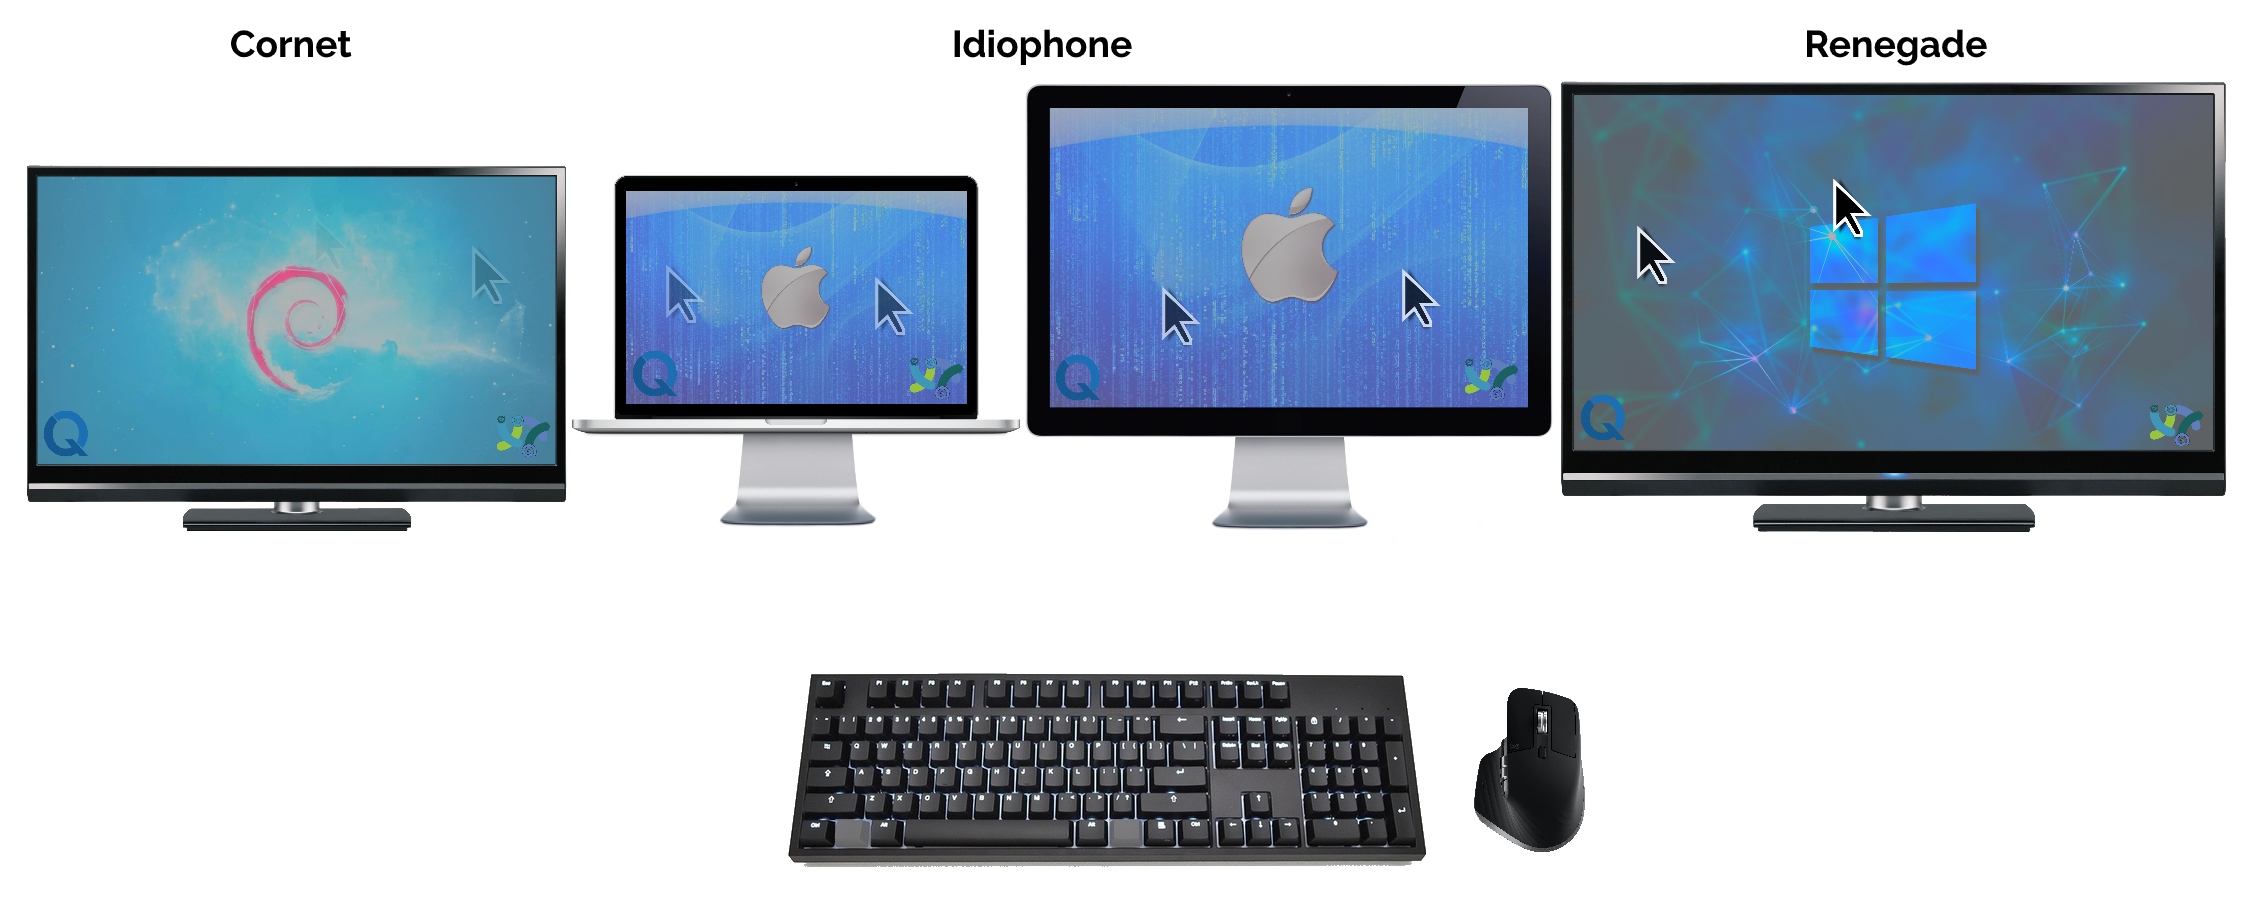 Illustration showing a Debian desktop called Cornet, a Mac laptop with attached monitor called Idiophone, and a Windows desktop called Renegade. All three share a single keyboard and mouse using Barrier.